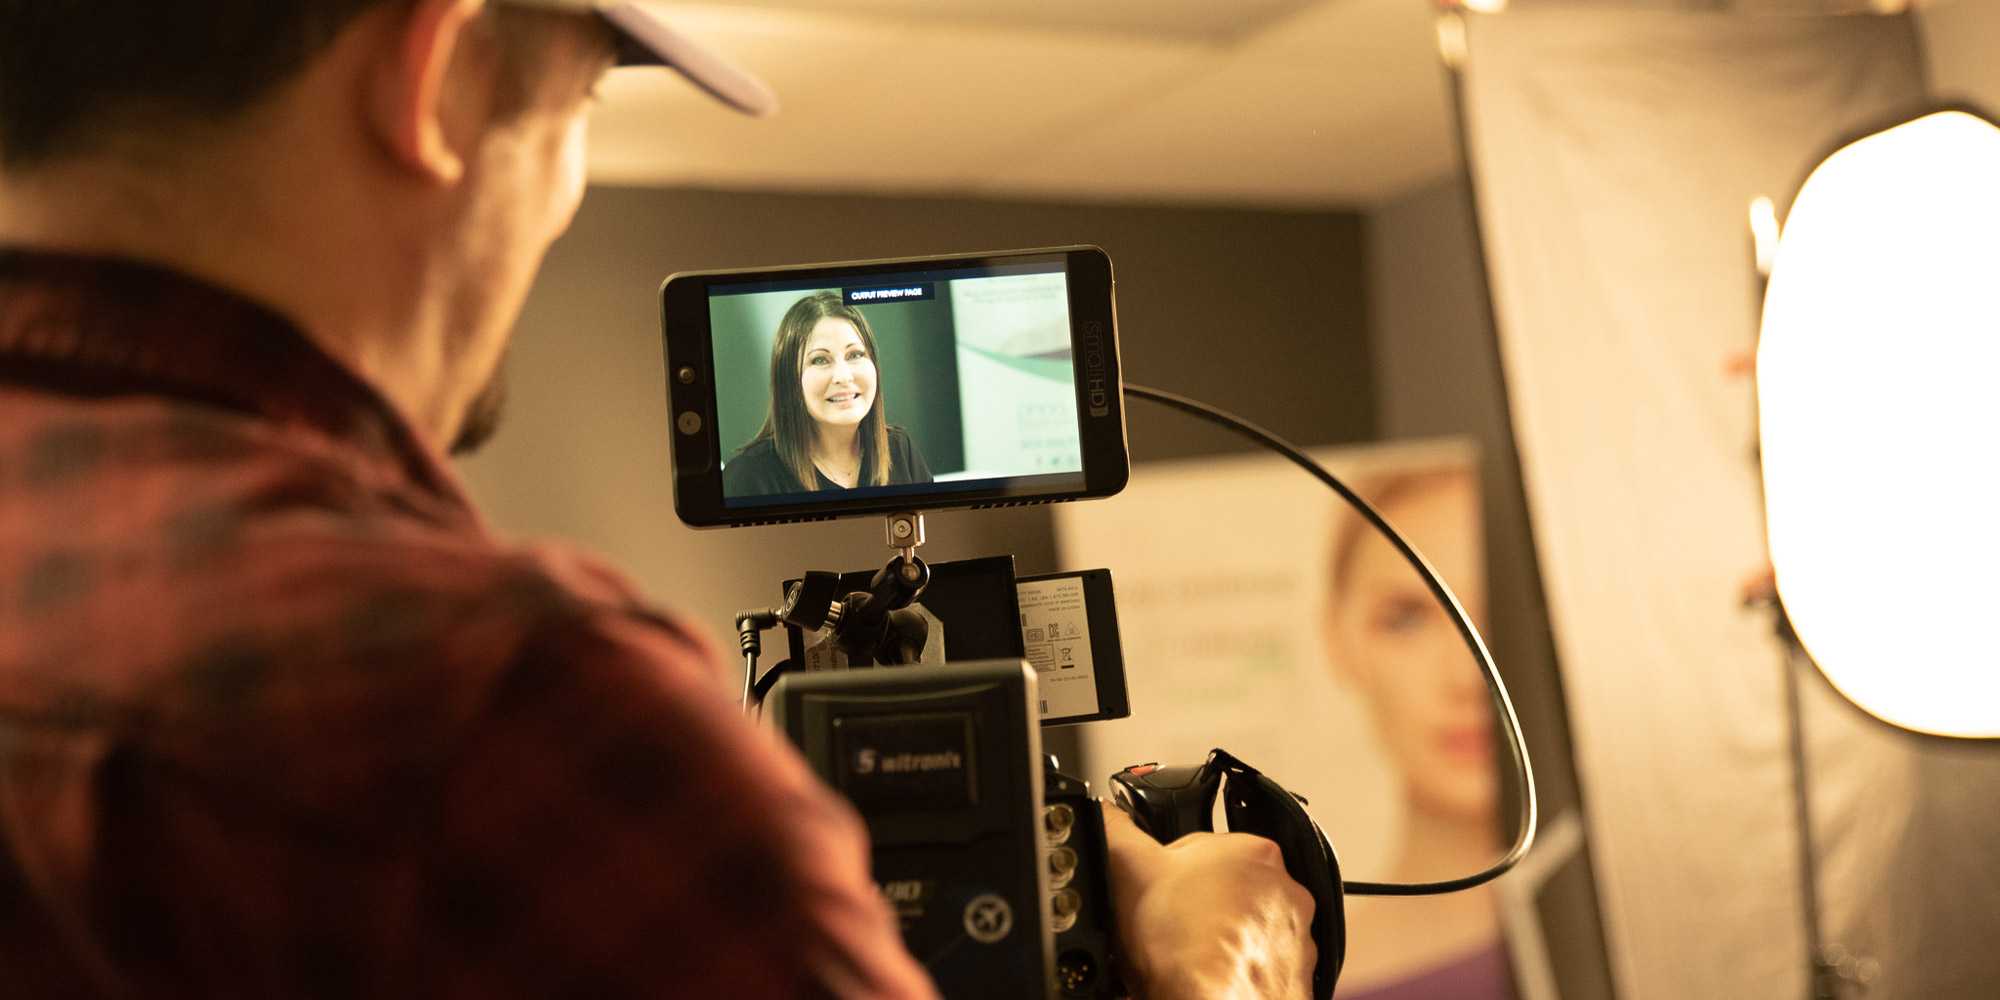 The 3 Pillars of Quality Video Production: Creativity, Equipment, and Expertise